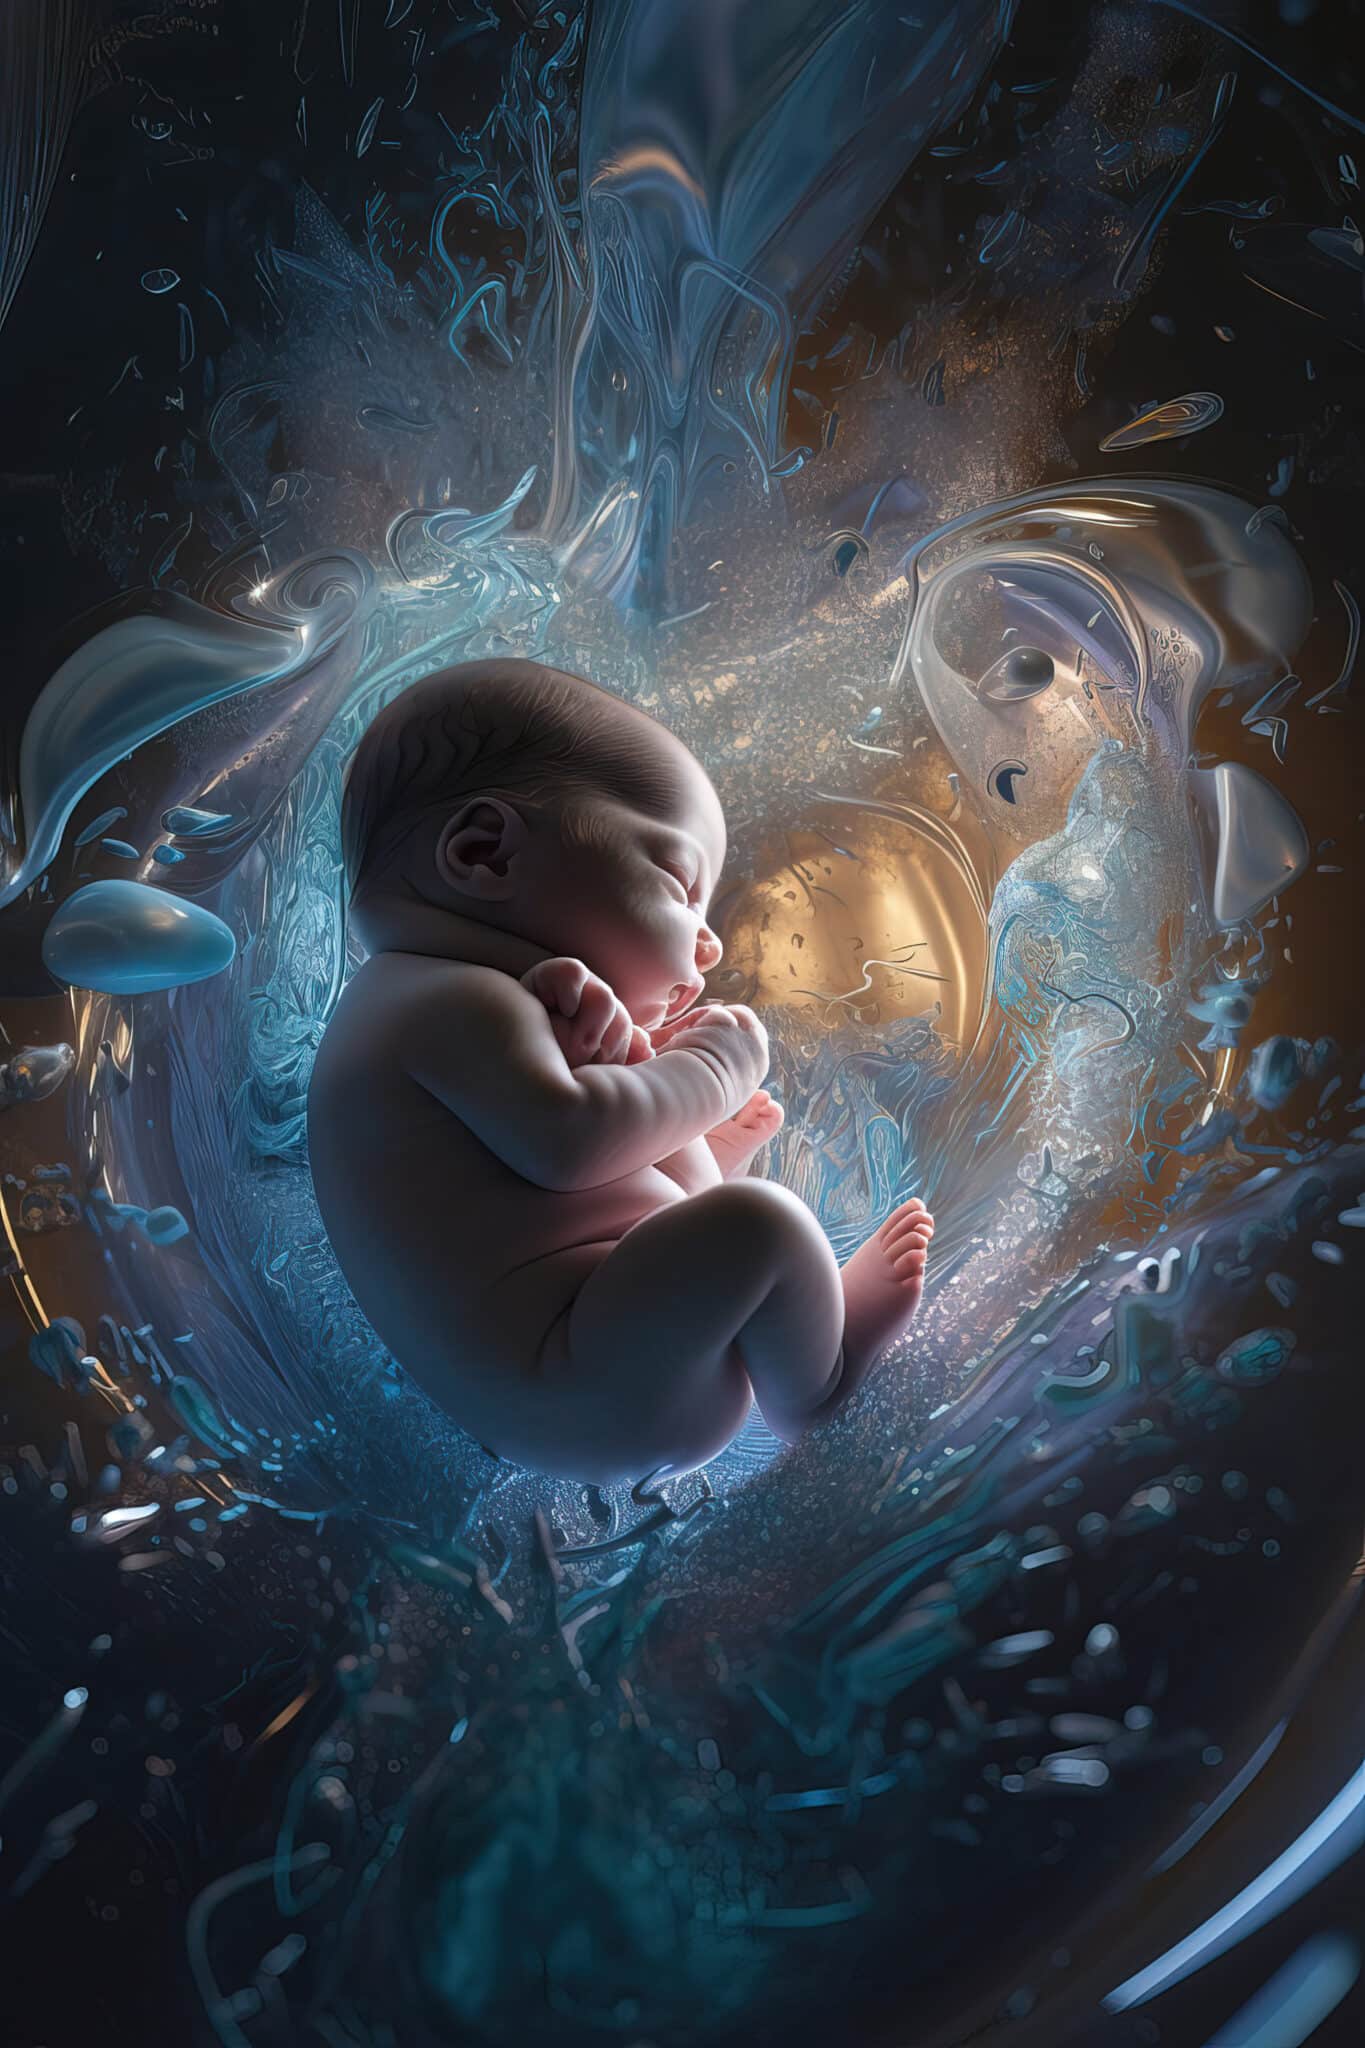 Baby inside belly - AI generated image